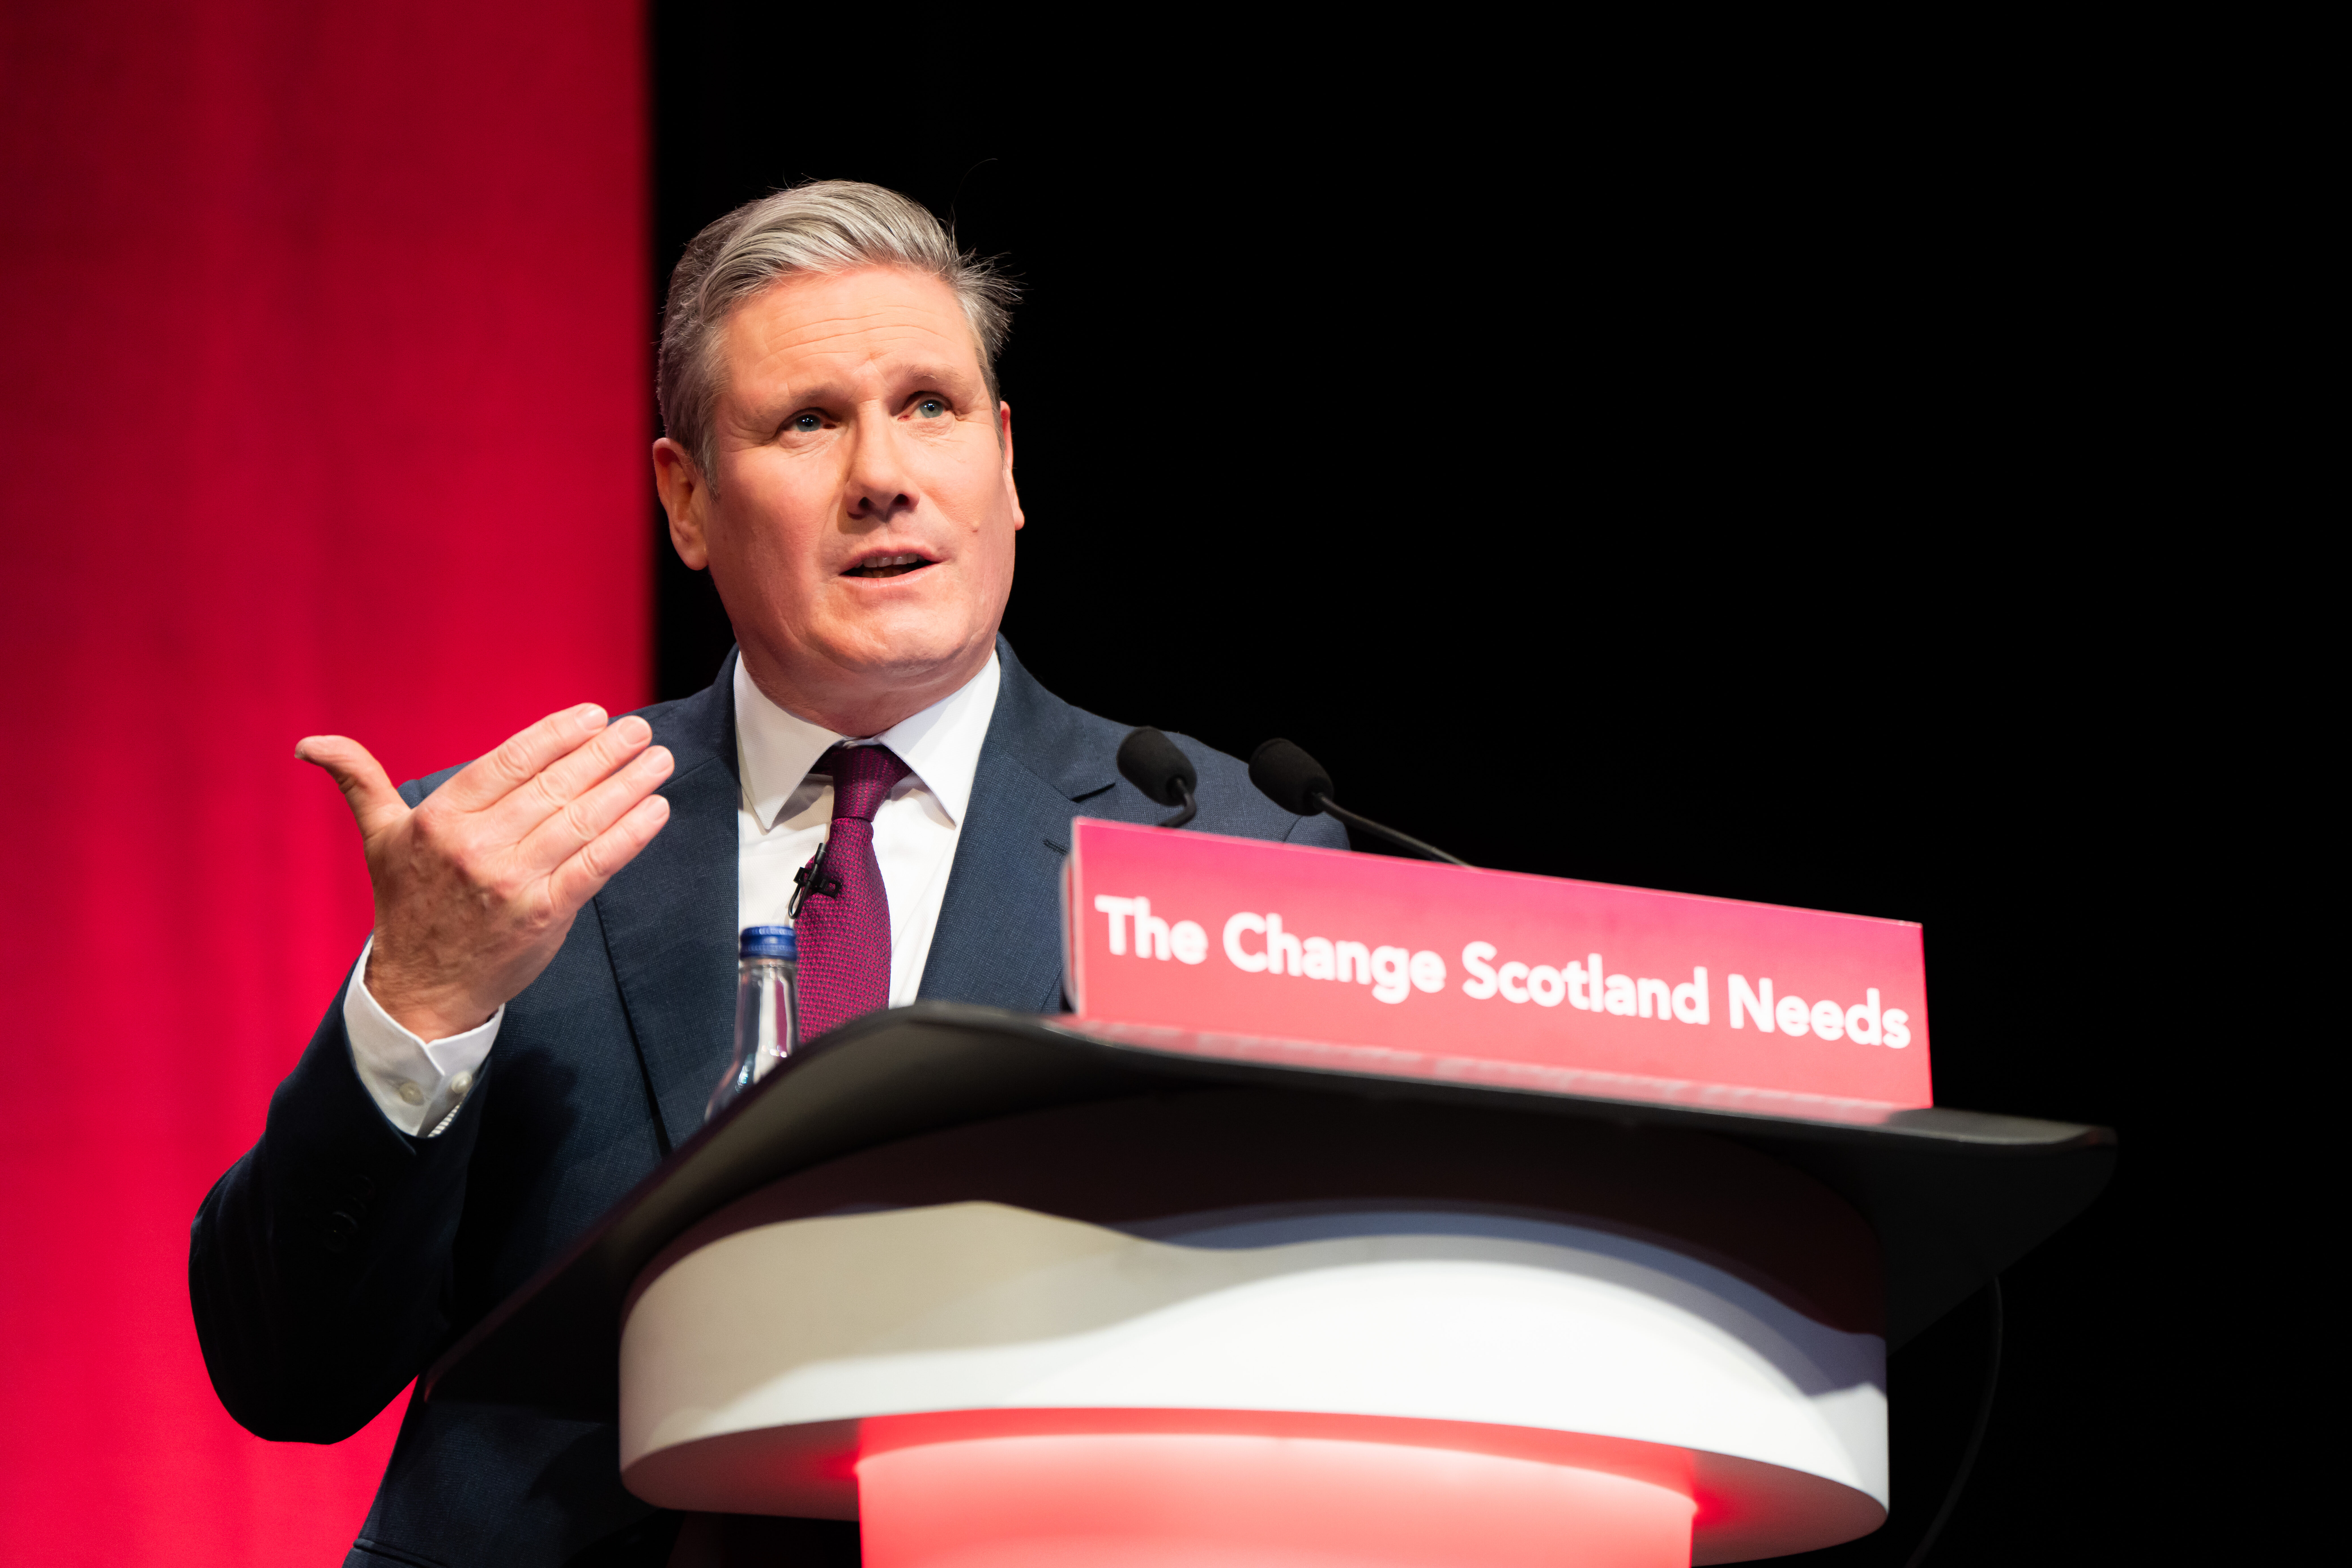 Keir Starmer speaking at a podium at the Scottish Labour conference